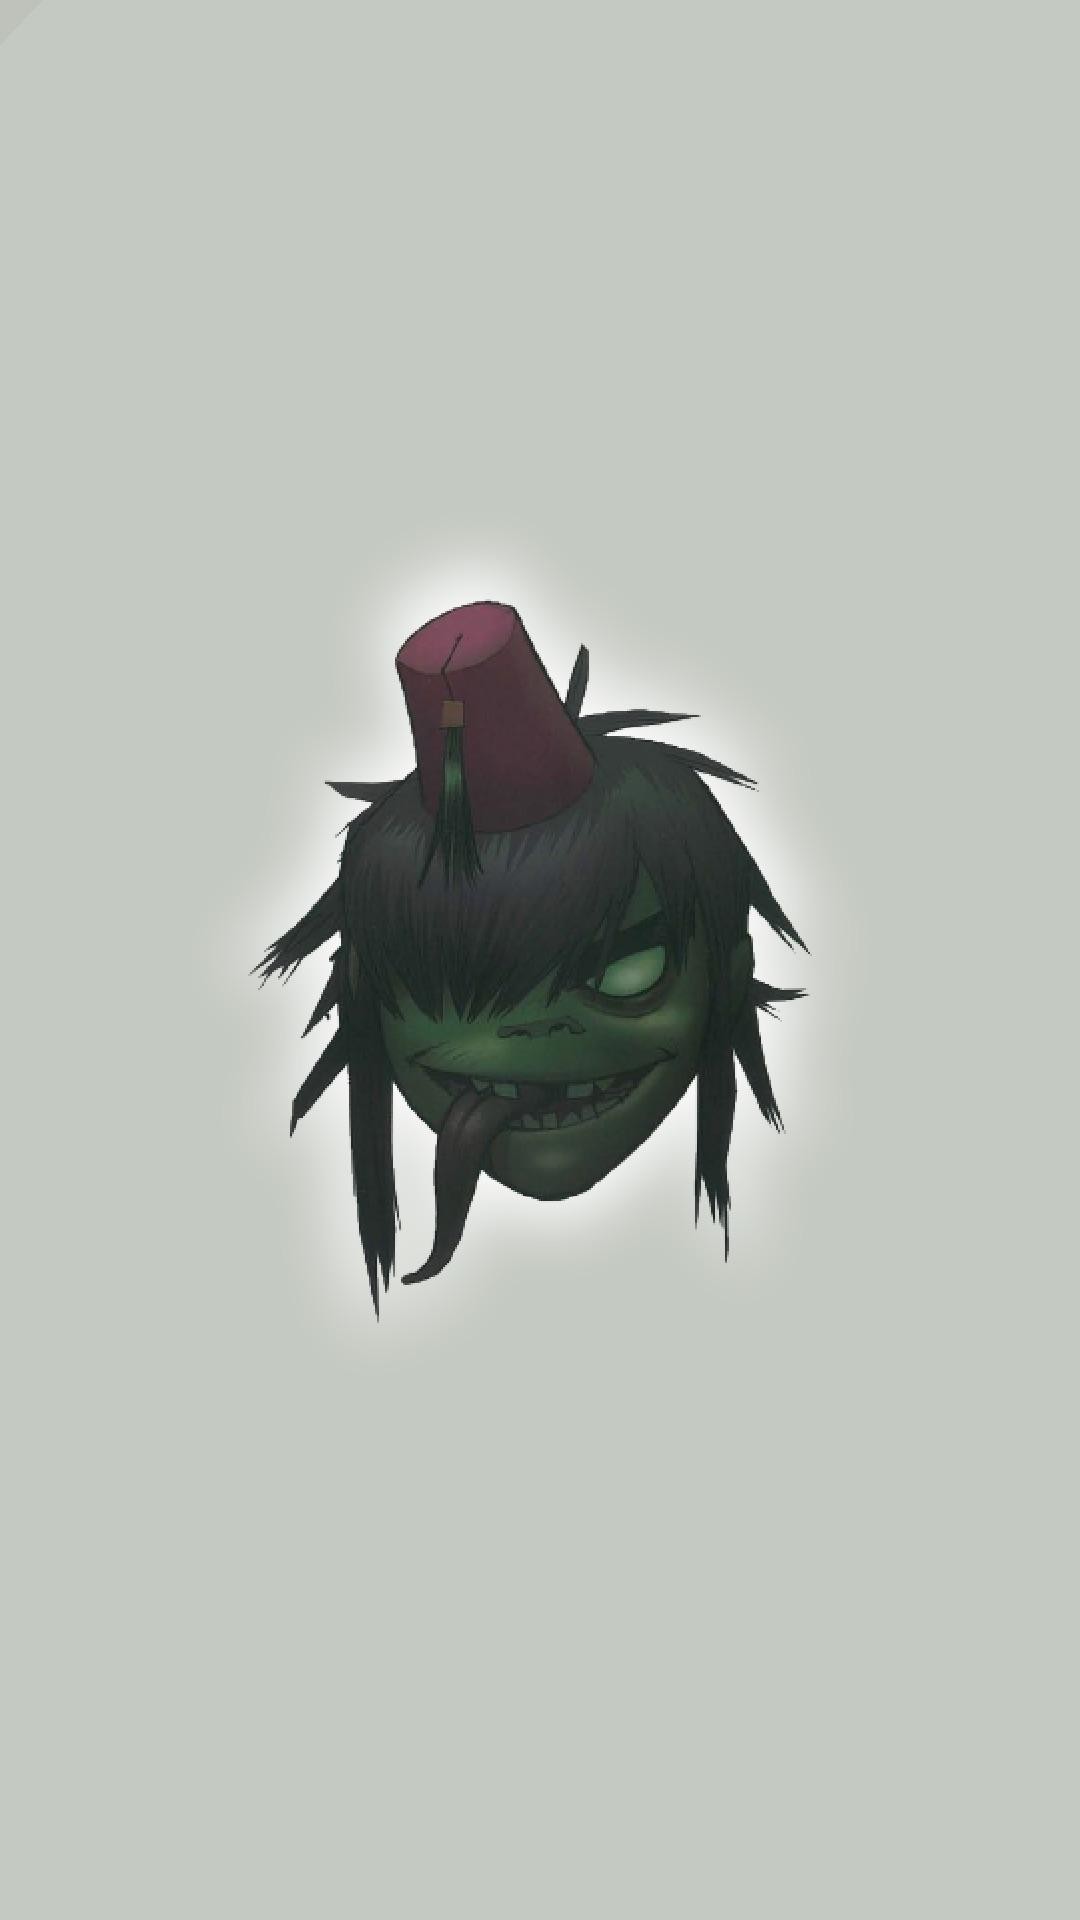 1080x1920 Made an iPhone Wallpaper with one of my favorite pieces of Gorillaz art ...